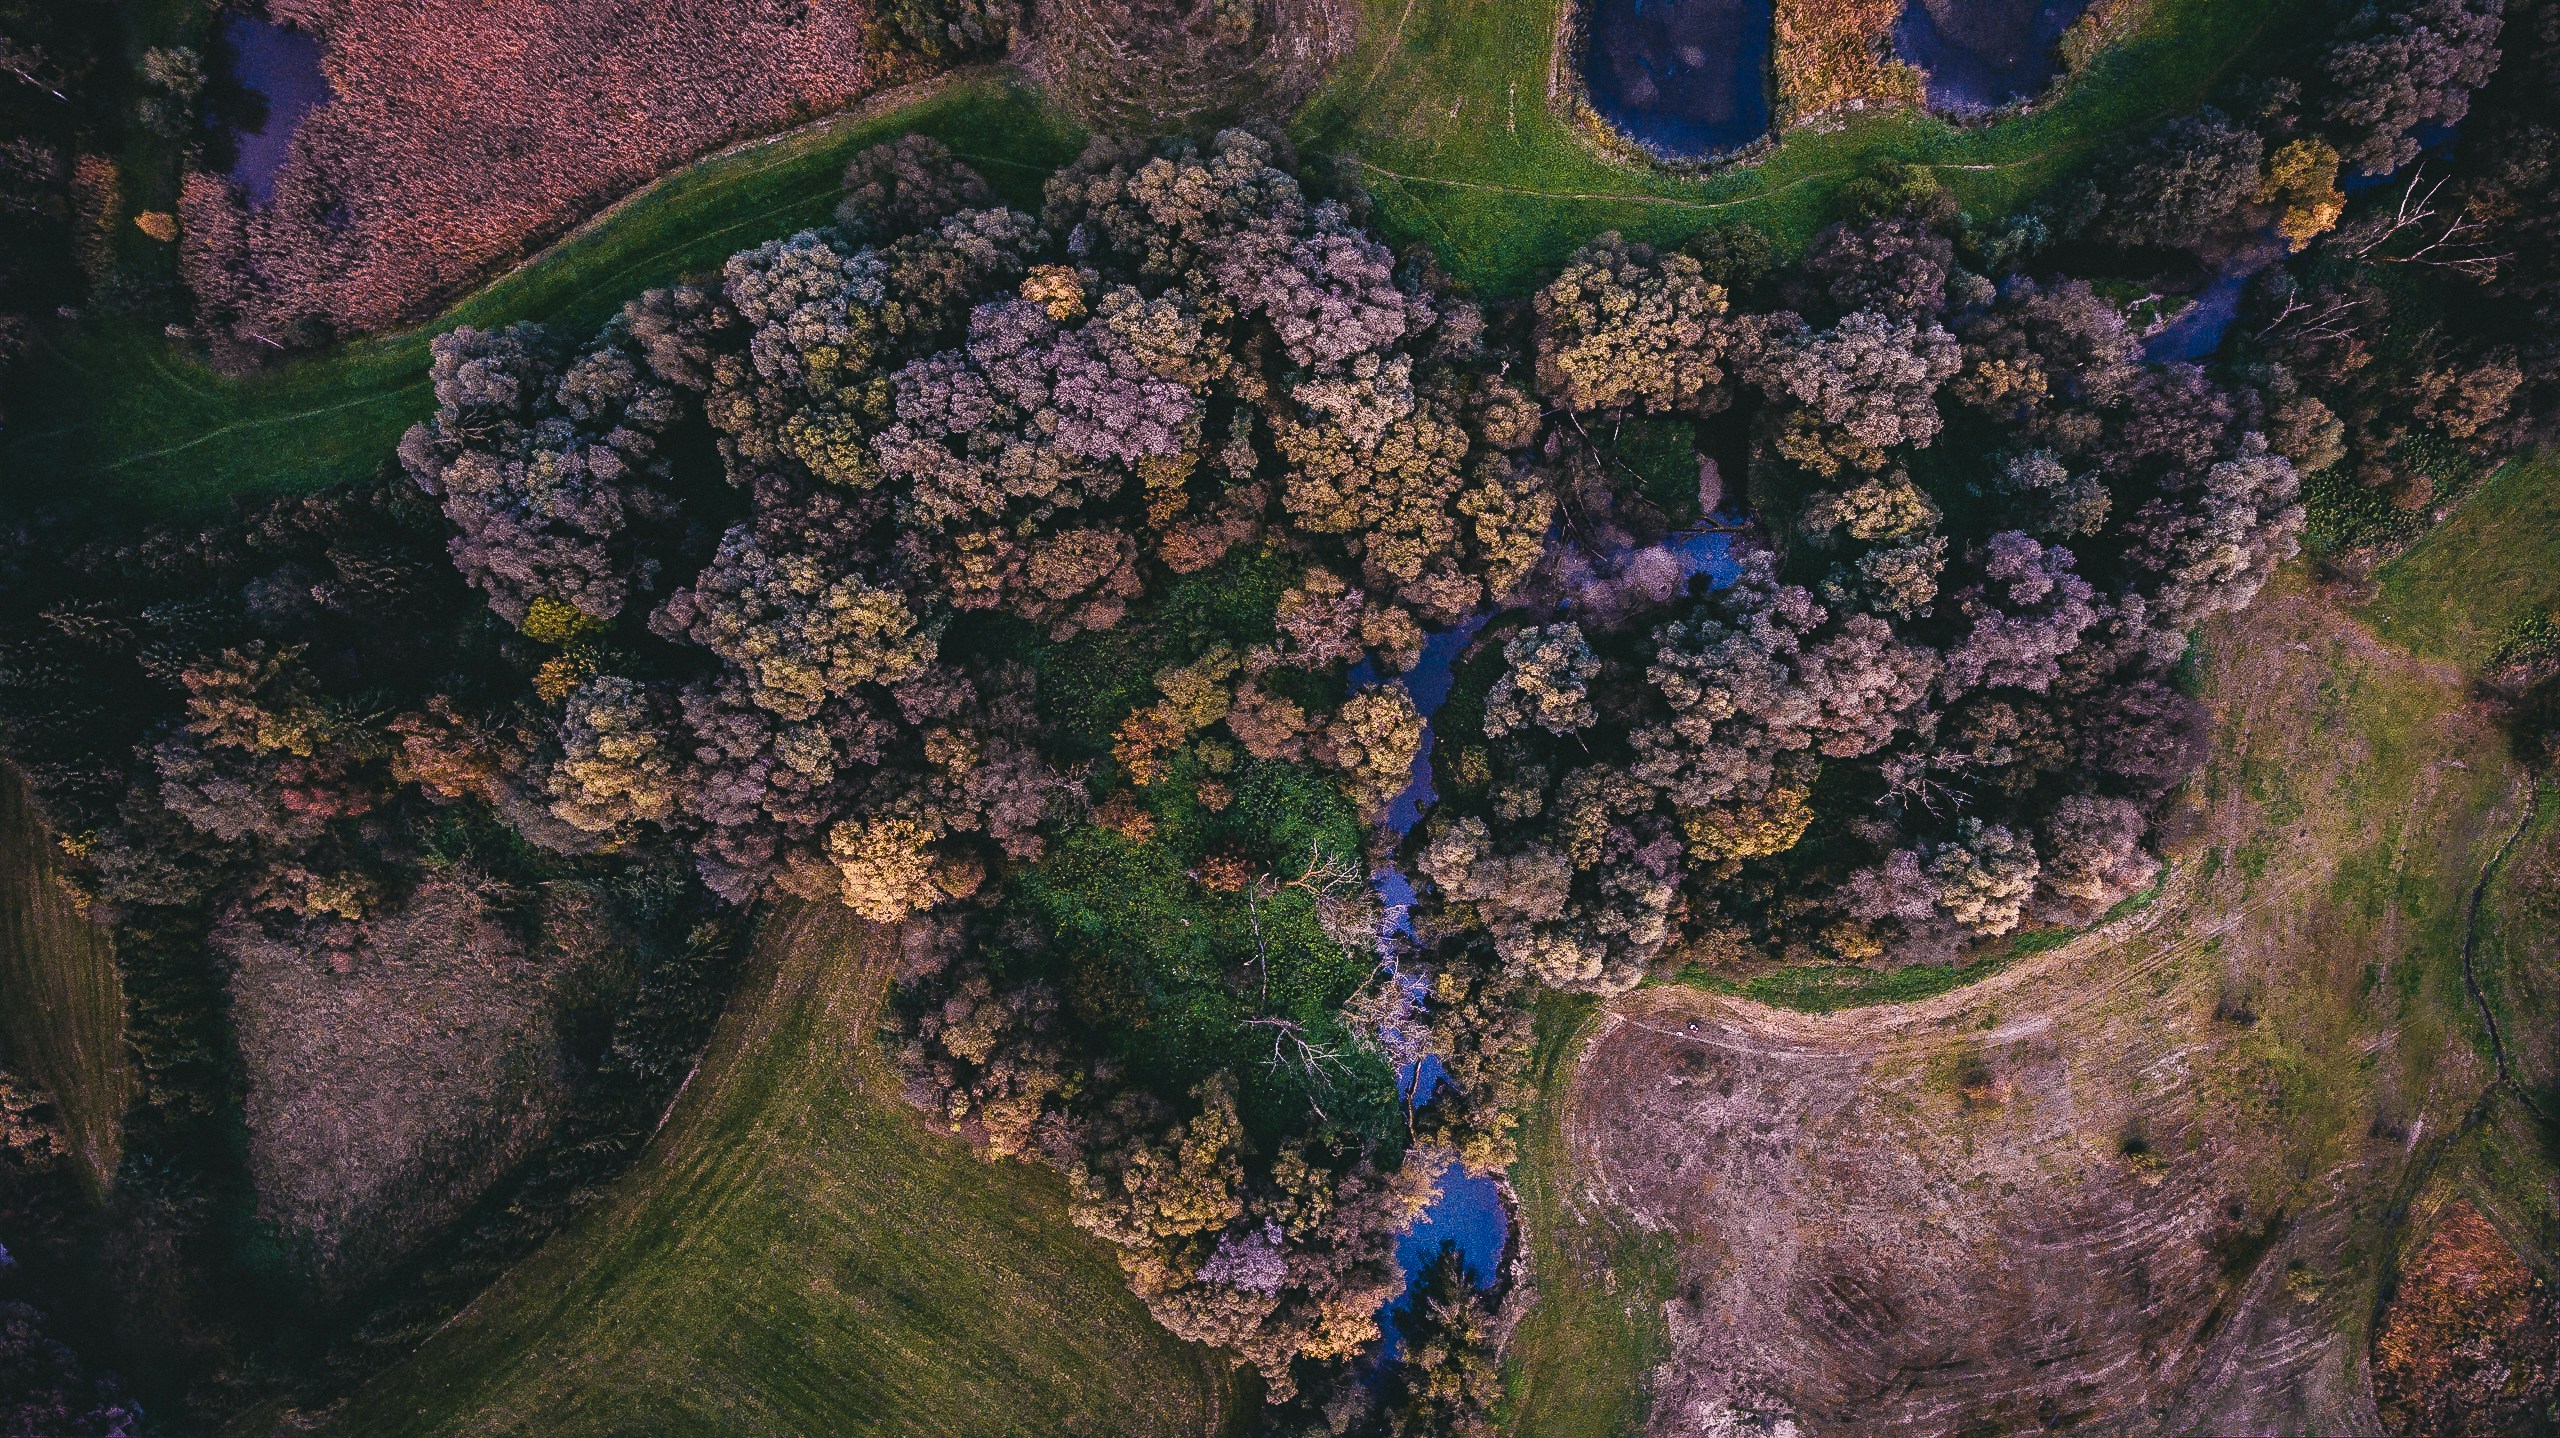 overhead view of trees on both sides of the path